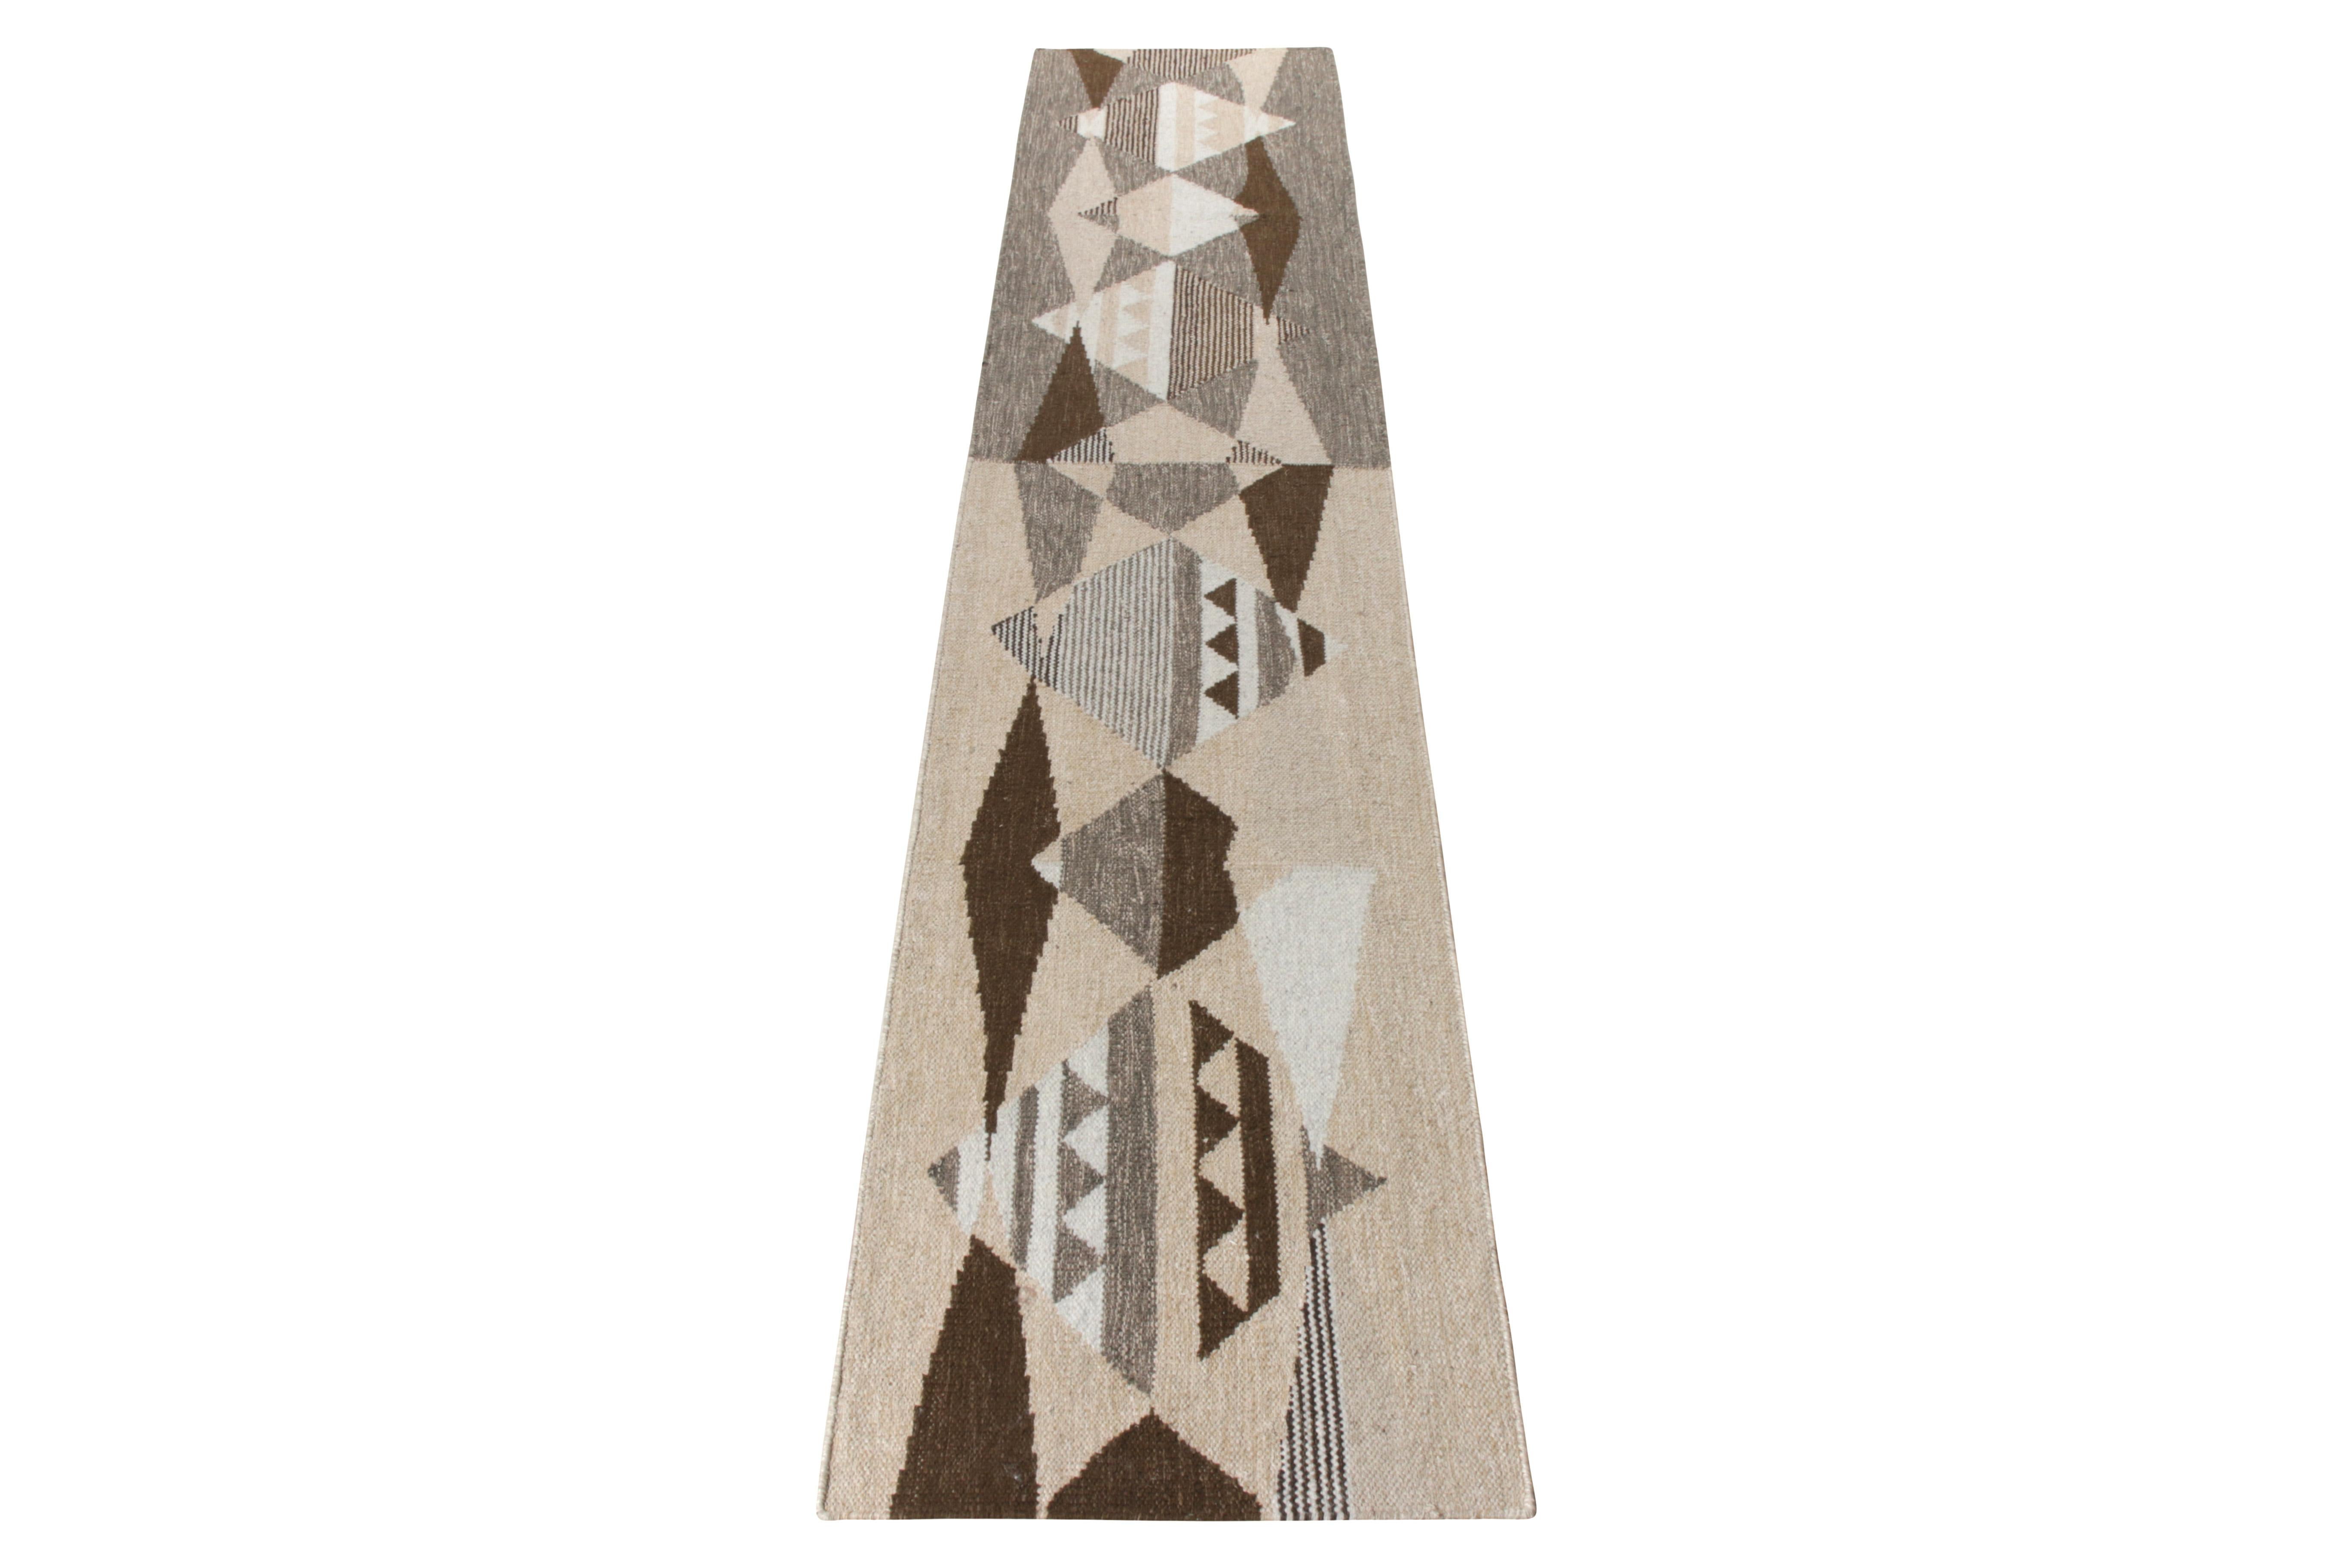 A 3x14 addition to Rug & Kilim’s award-winning Scandinavian flat weave collection. Featuring a scintillating geometric pattern in beige-brown, white and gray, the Kilim runner draws attention towards the dextrous employment of geometry where the